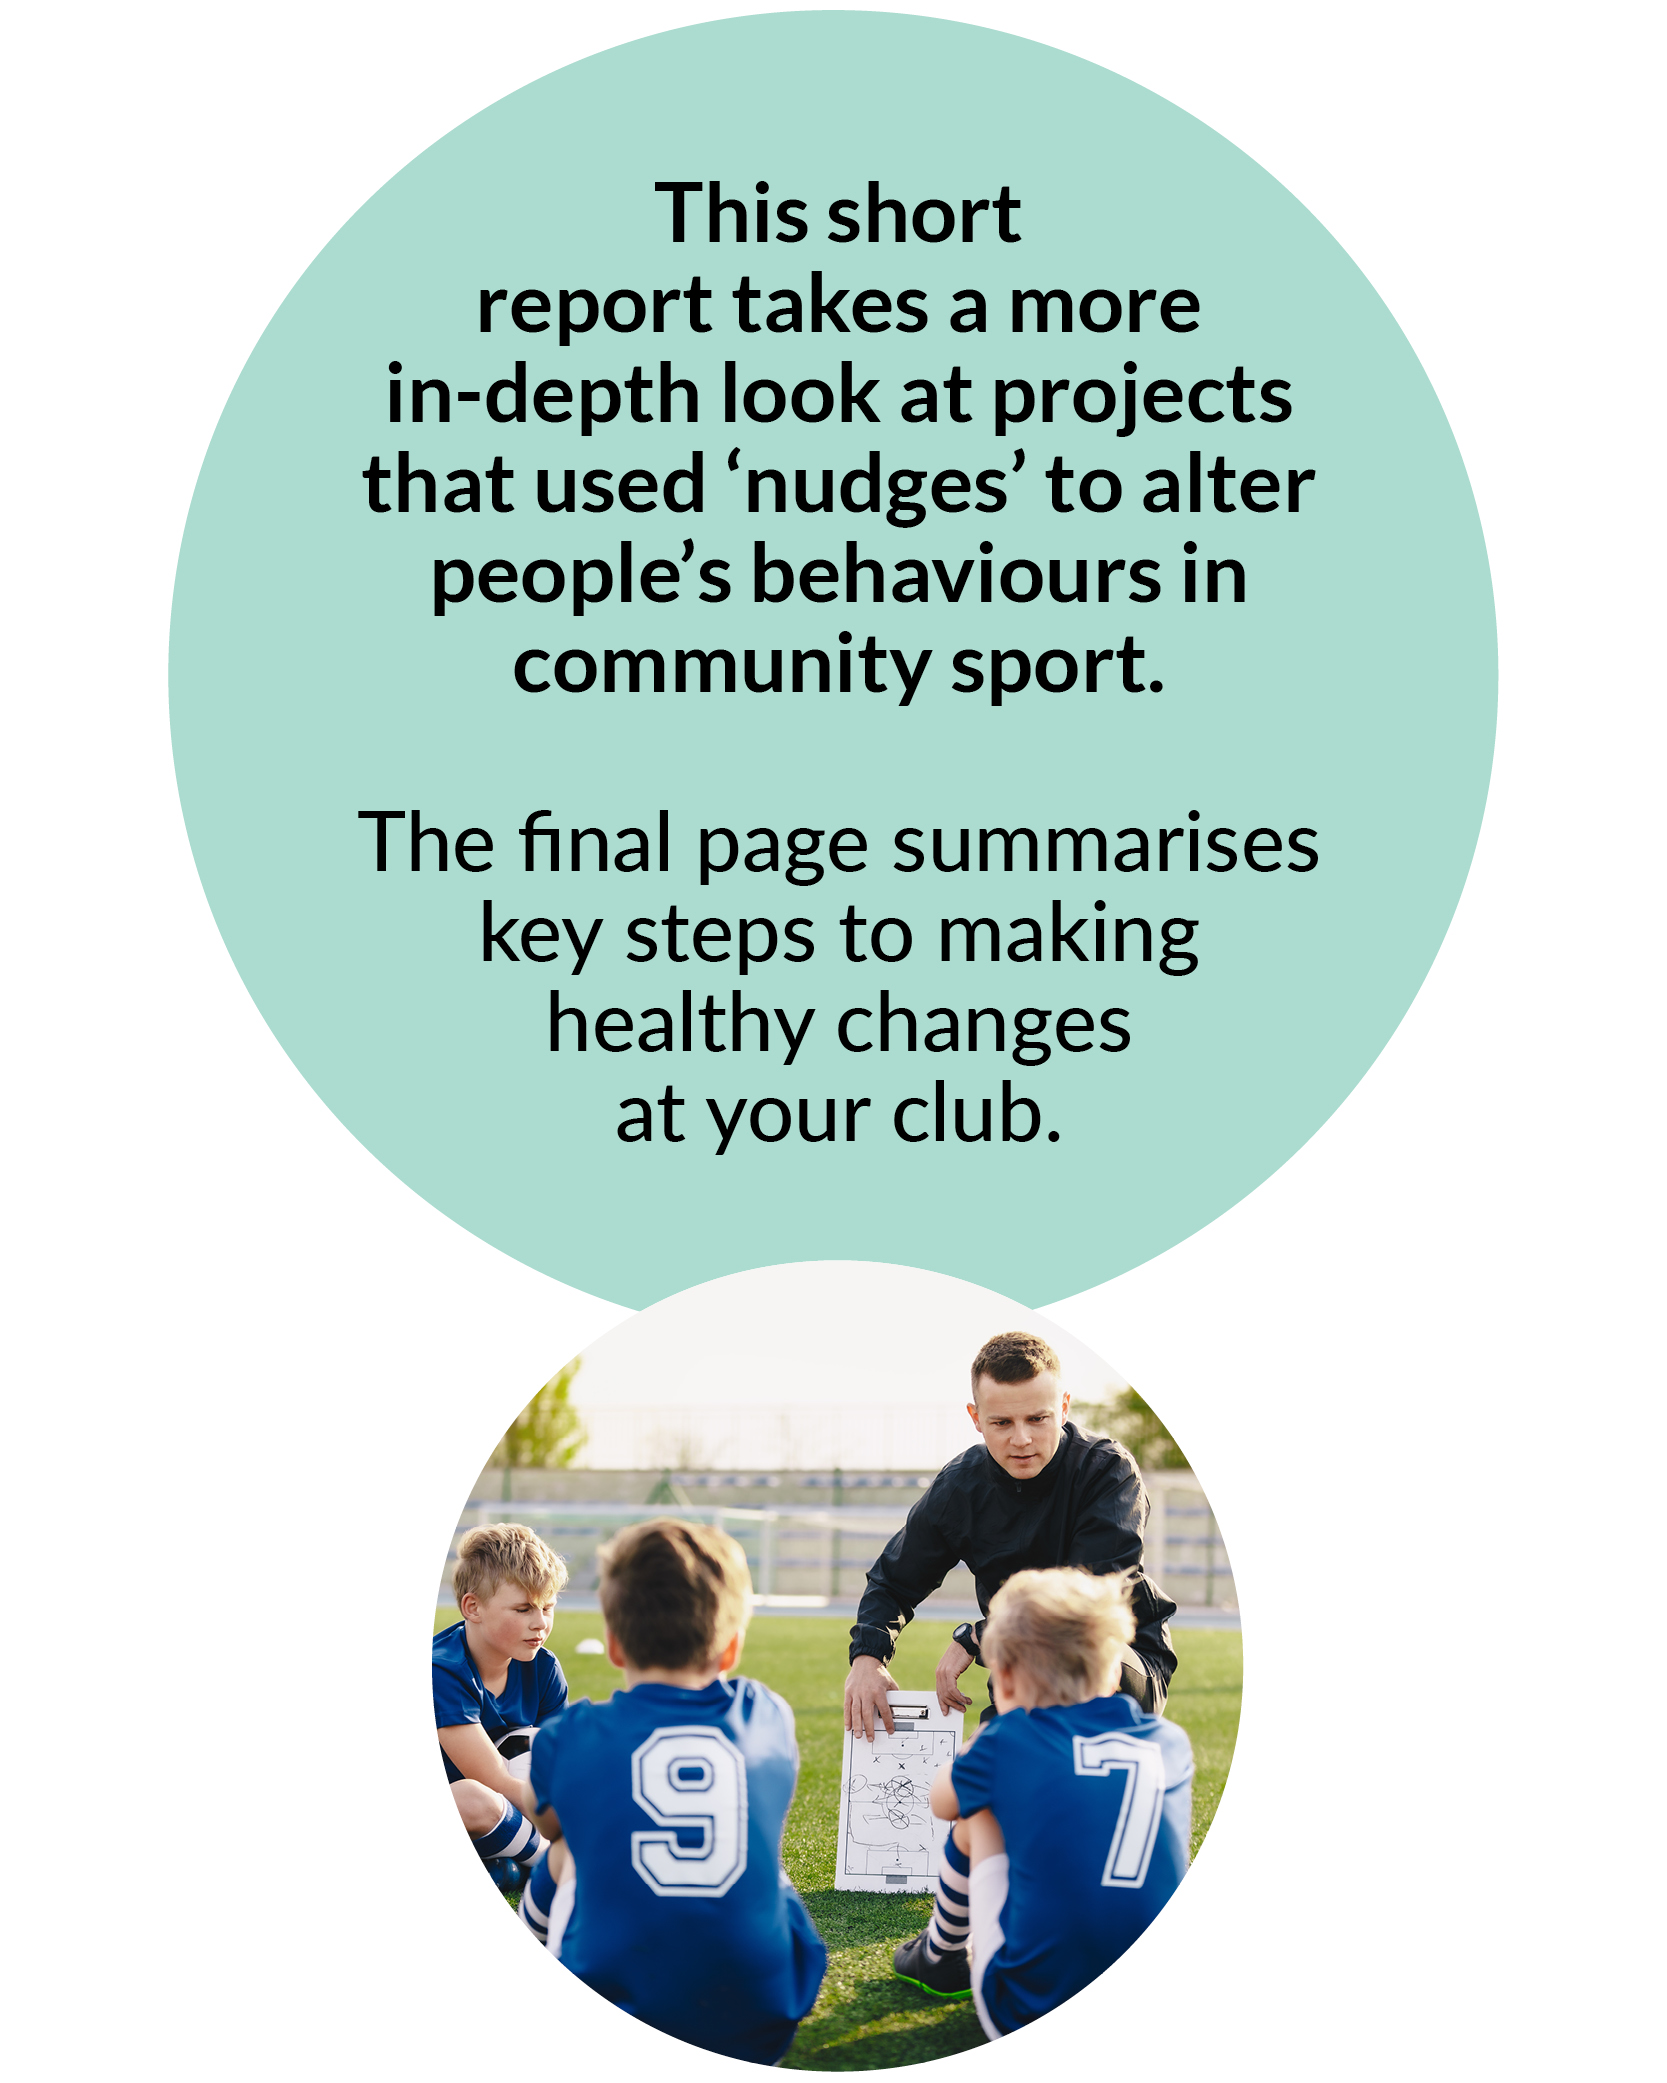 Healthy Food and Drink Choices in Community Sport